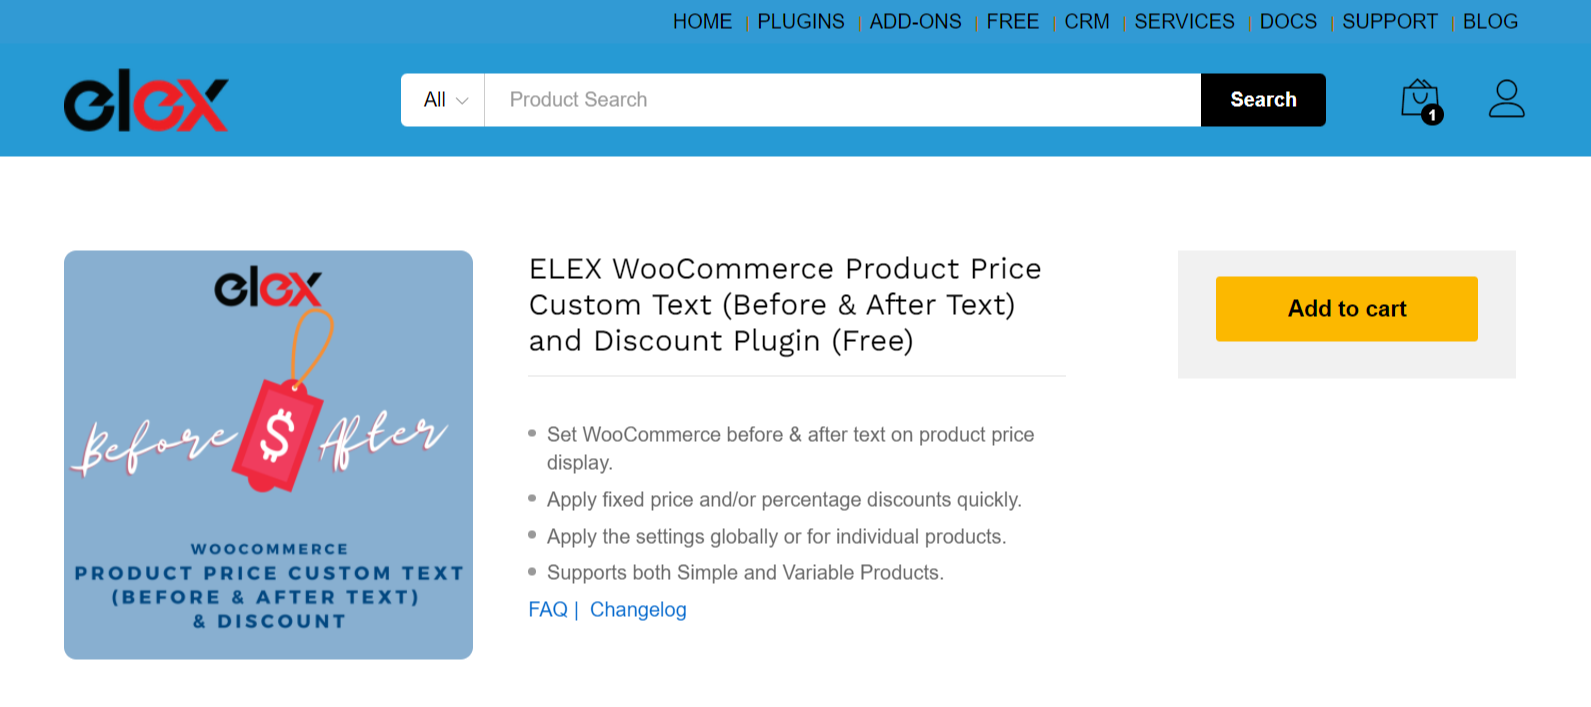 ELEX WooCommerce Product Price Custom Text (Before & After Text) and Discount Plugin product page.